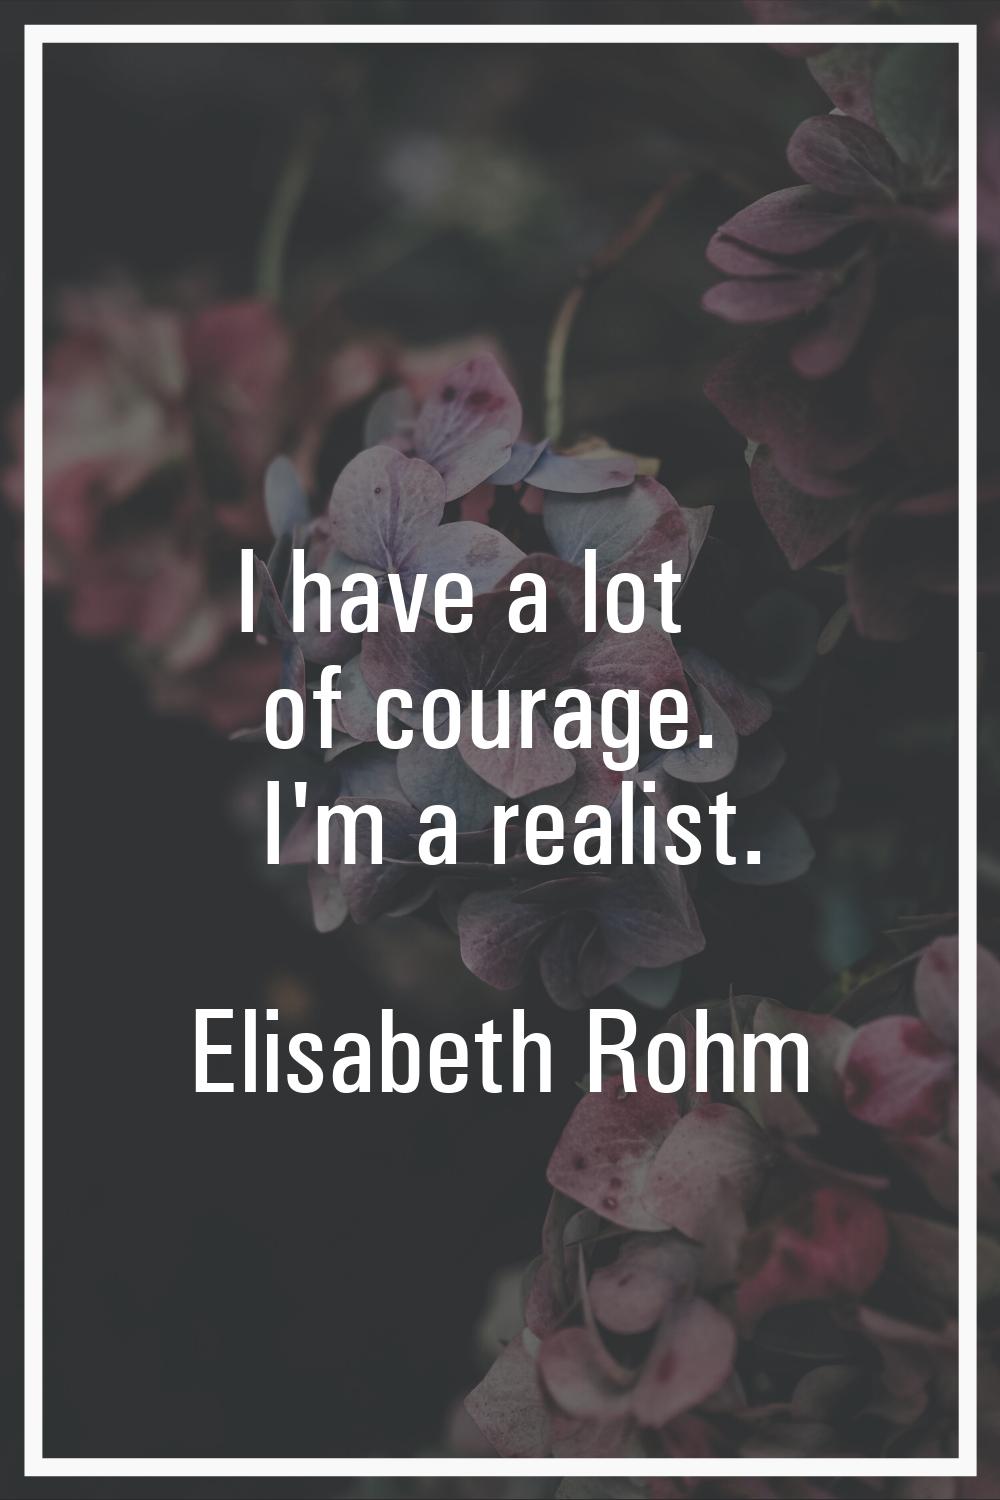 I have a lot of courage. I'm a realist.